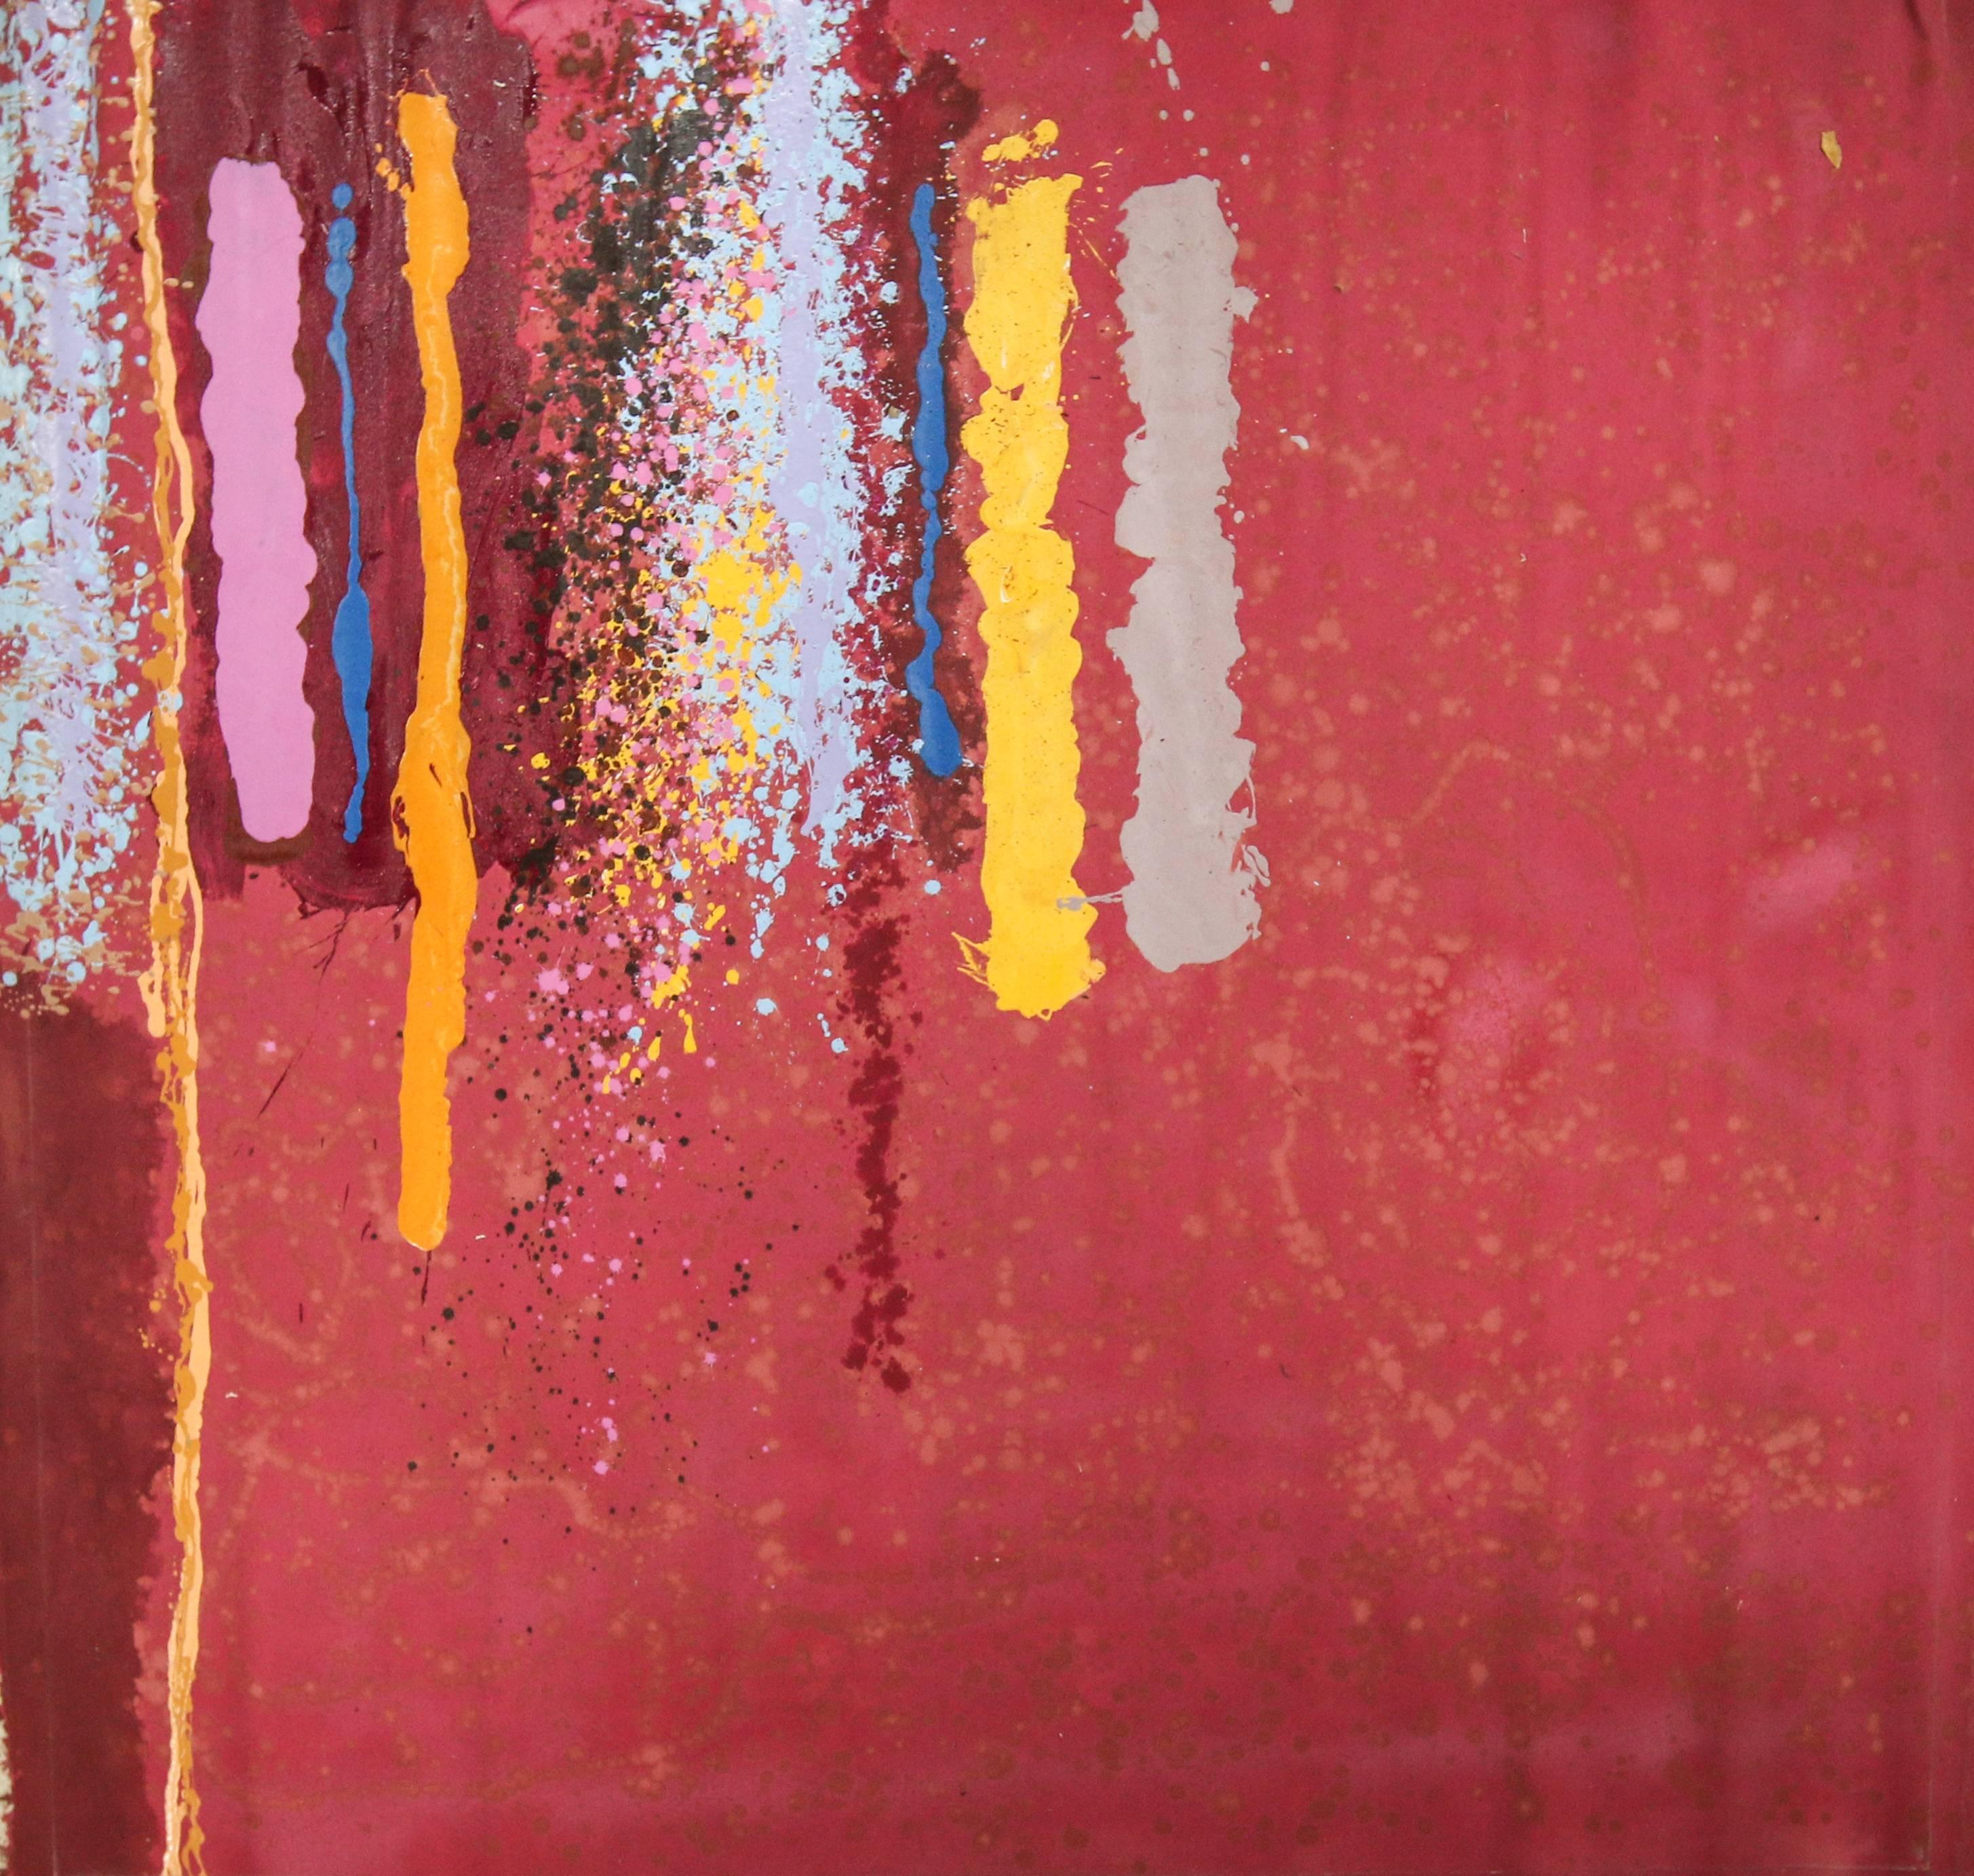 82 x 84 inches, acrylic on non-stretched canvas
Genuine Abstract Expressionist painting c.1970 by Edward Avedisian.

Mr. Avedisian was best known for his work in the 1960s: brilliantly colored, boldly composed canvases that combined Minimalism’s